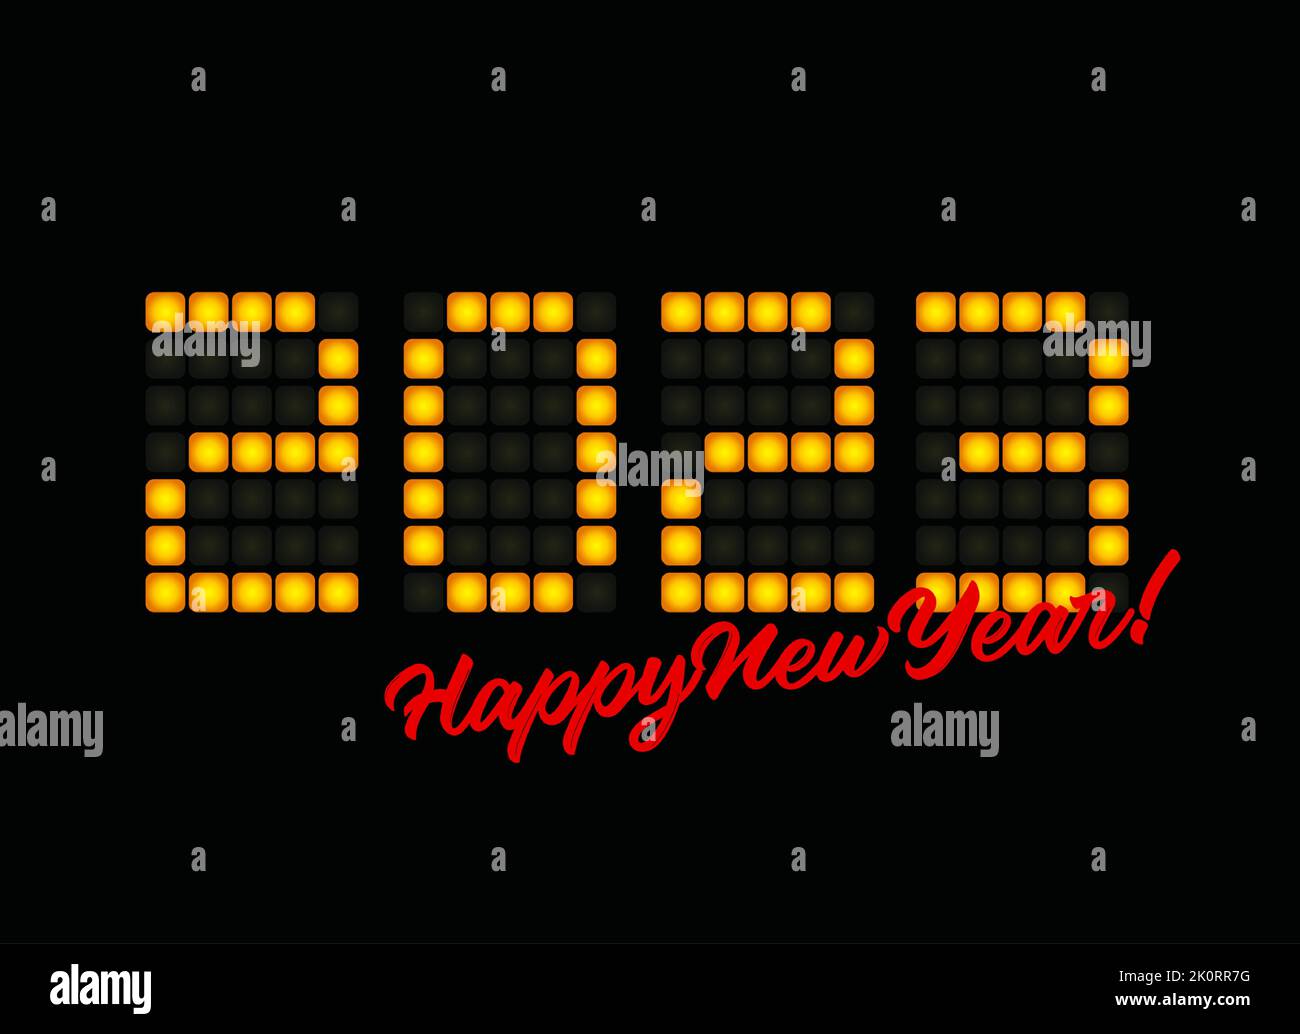 2023 digital numbers on game scoreboard. Happy New Year event poster, greeting card cover, 2023 calendar design, invitation to celebrate New Year and Stock Vector